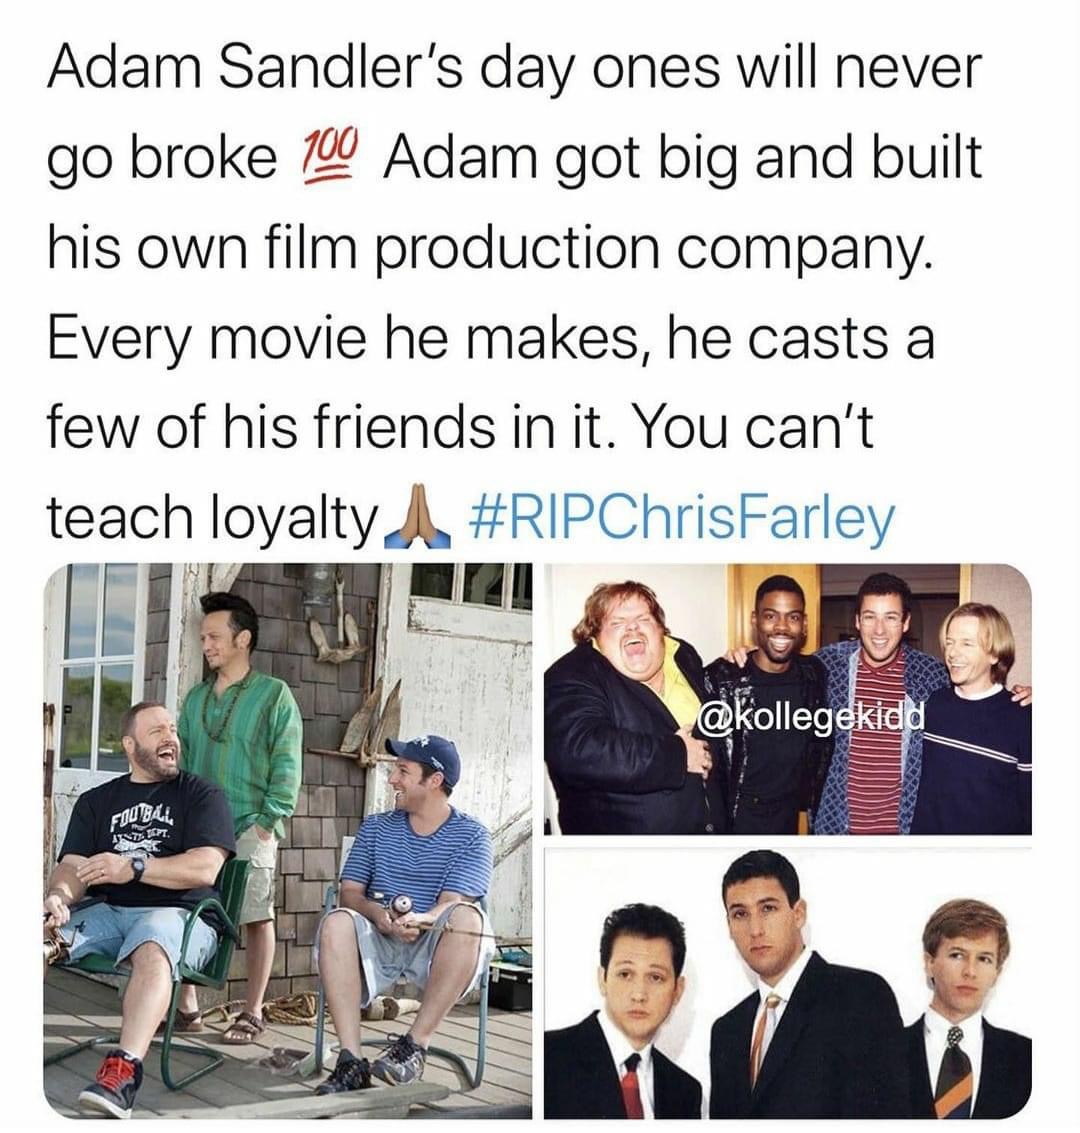 human behavior - Adam Sandler's day ones will never go broke 100 Adam got big and built his own film production company. Every movie he makes, he casts a few of his friends in it. You can't teach loyalty A Atvirt